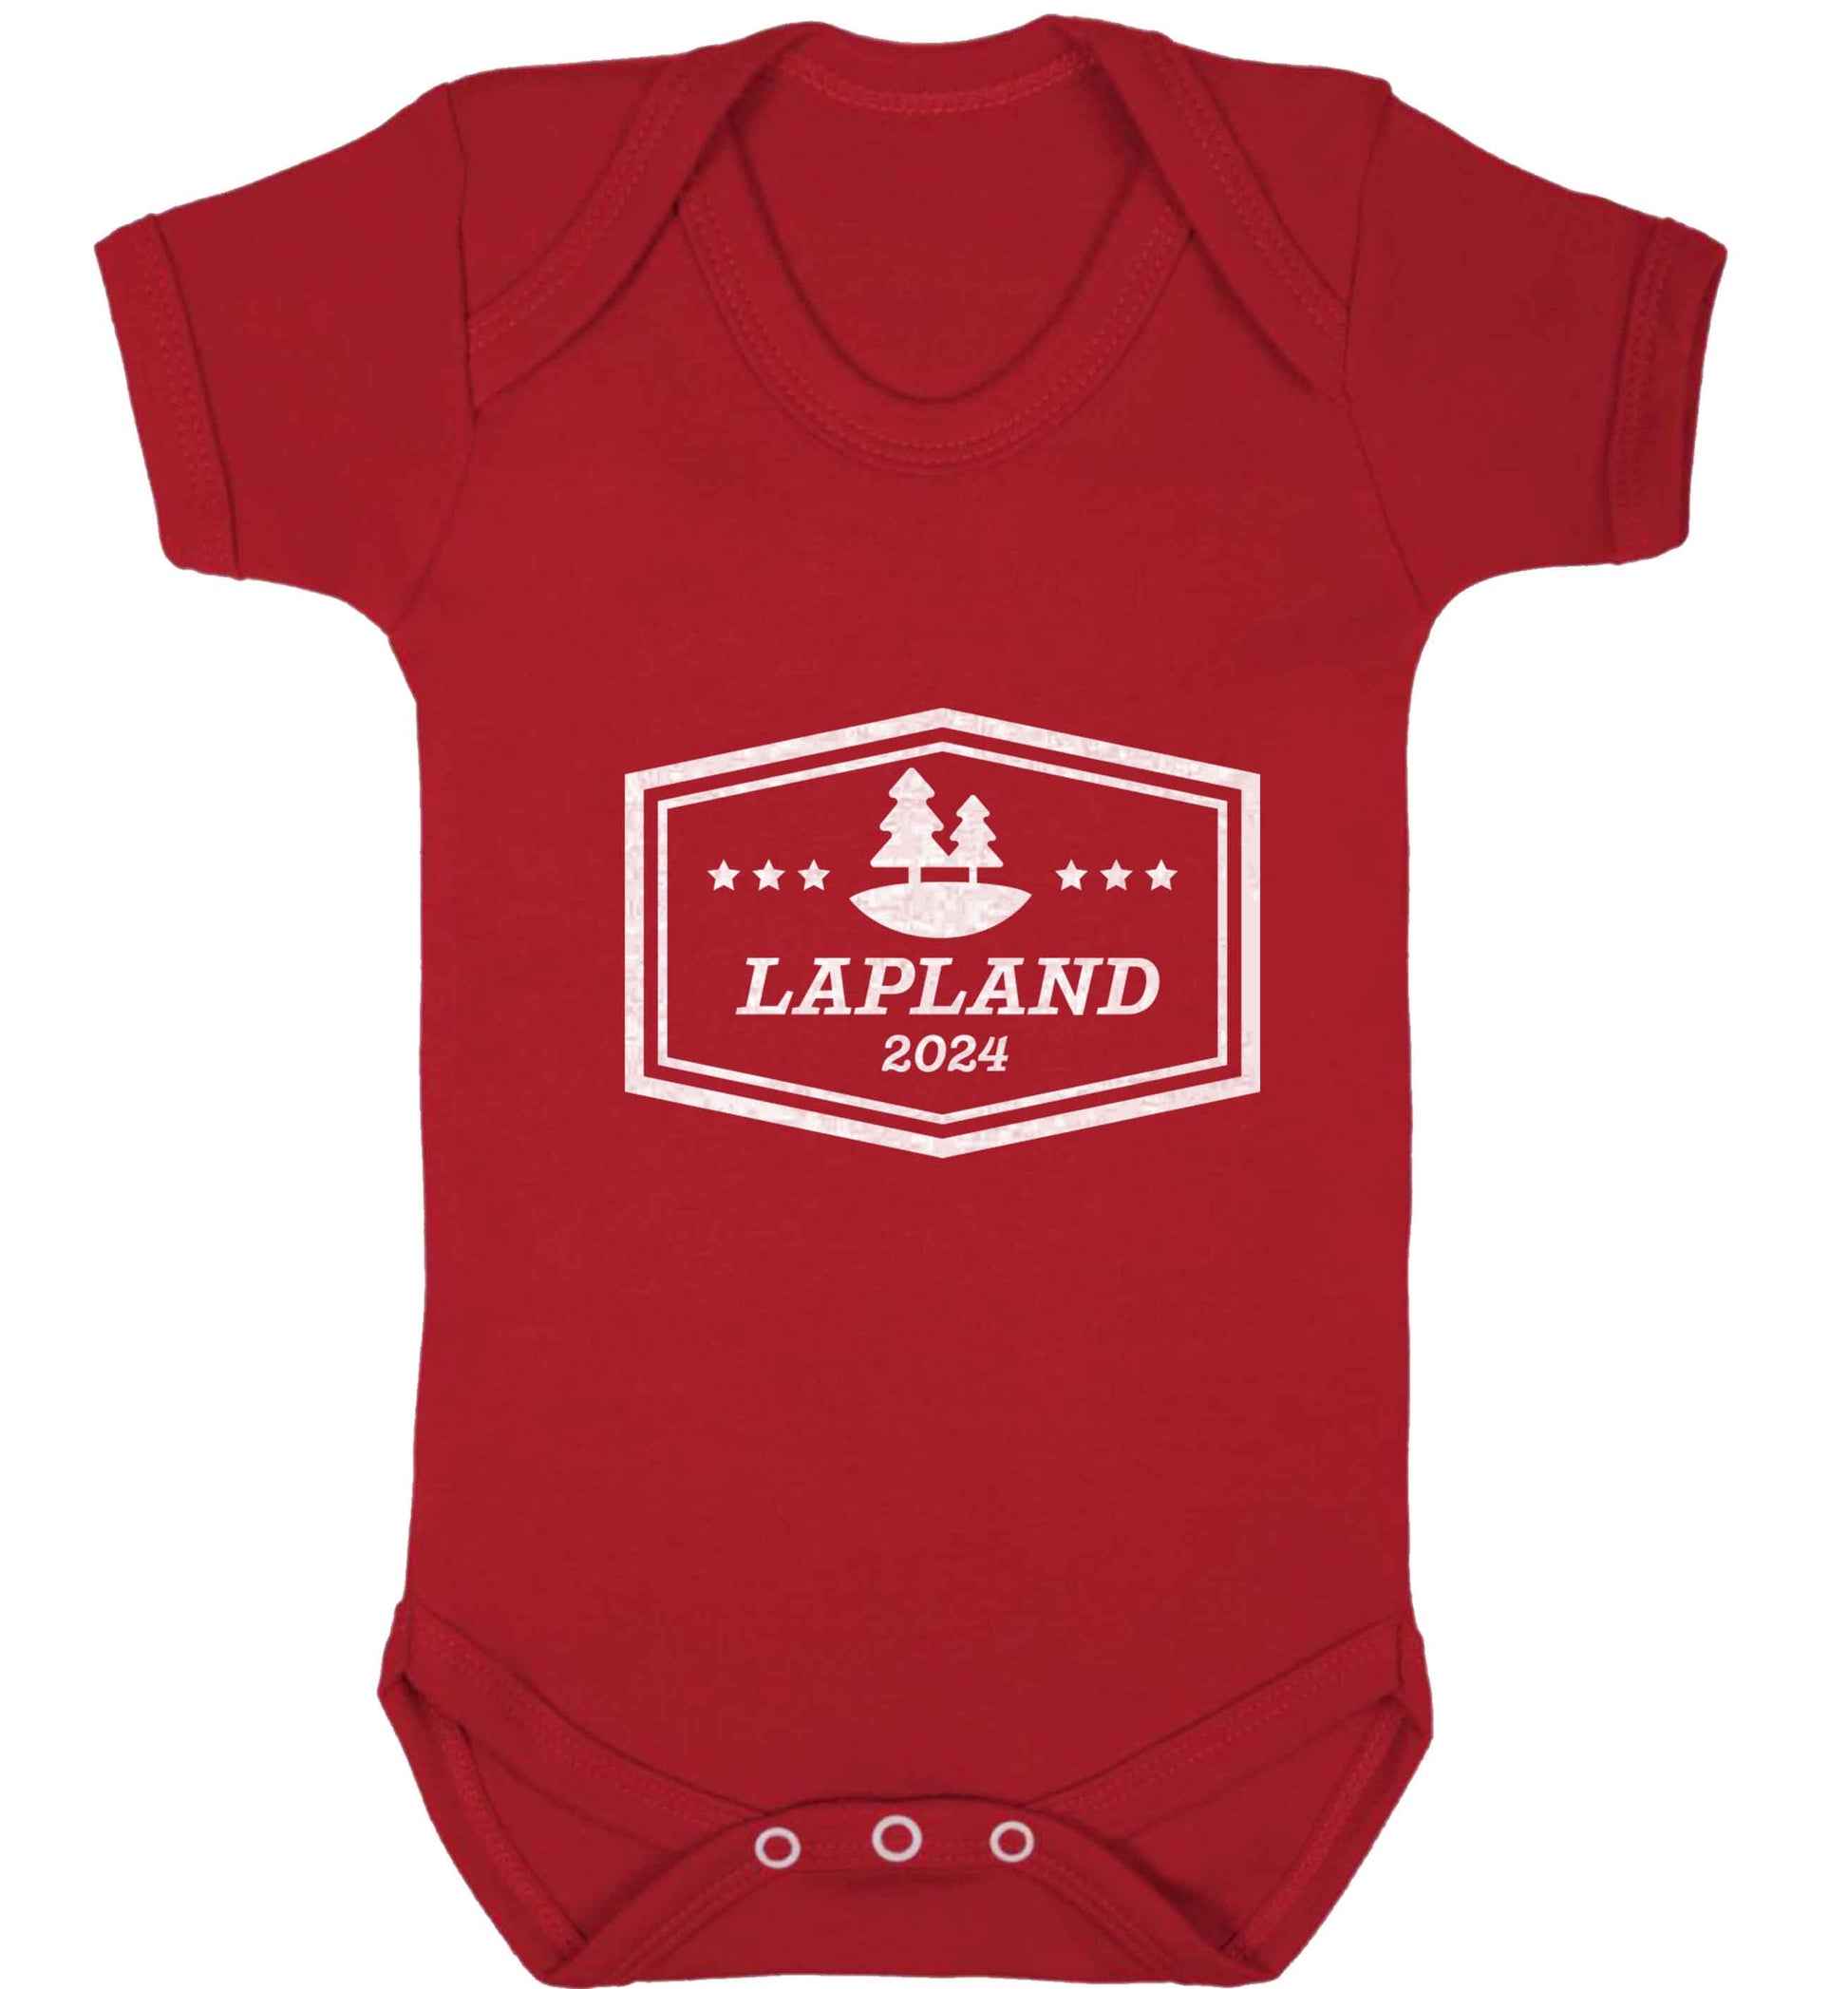 Custom date Lapland baby vest red 18-24 months